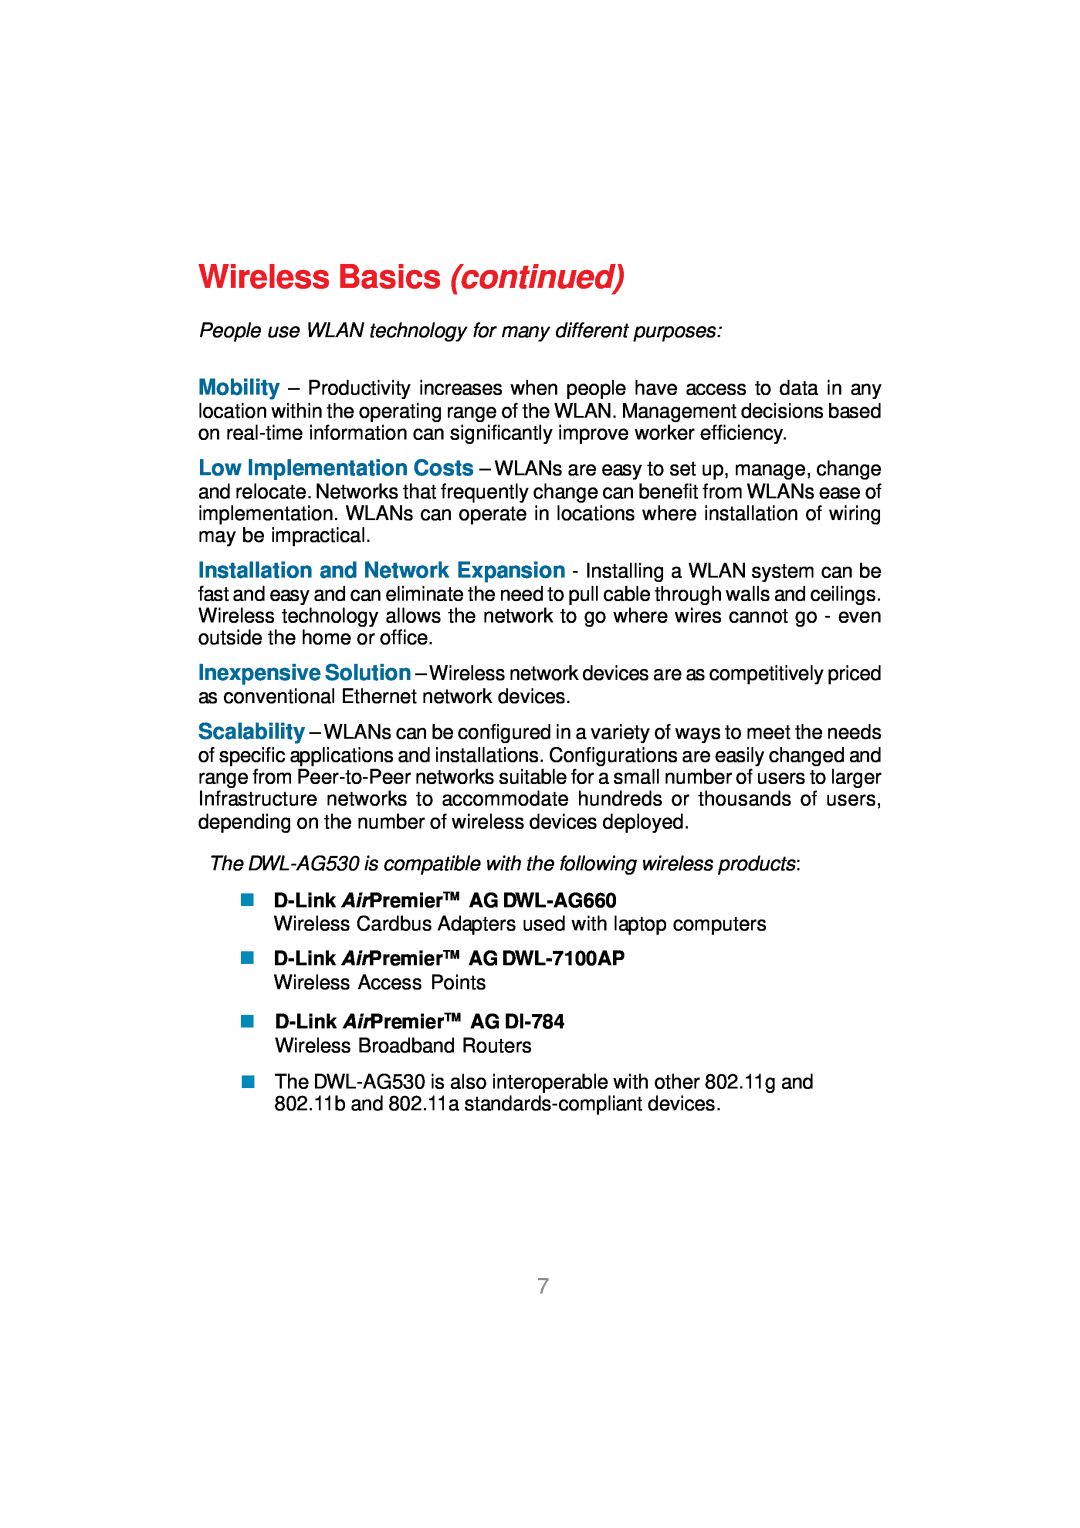 D-Link DWL-AG530 manual Wireless Basics continued, Installation and Network Expansion - Installing a WLAN system can be 